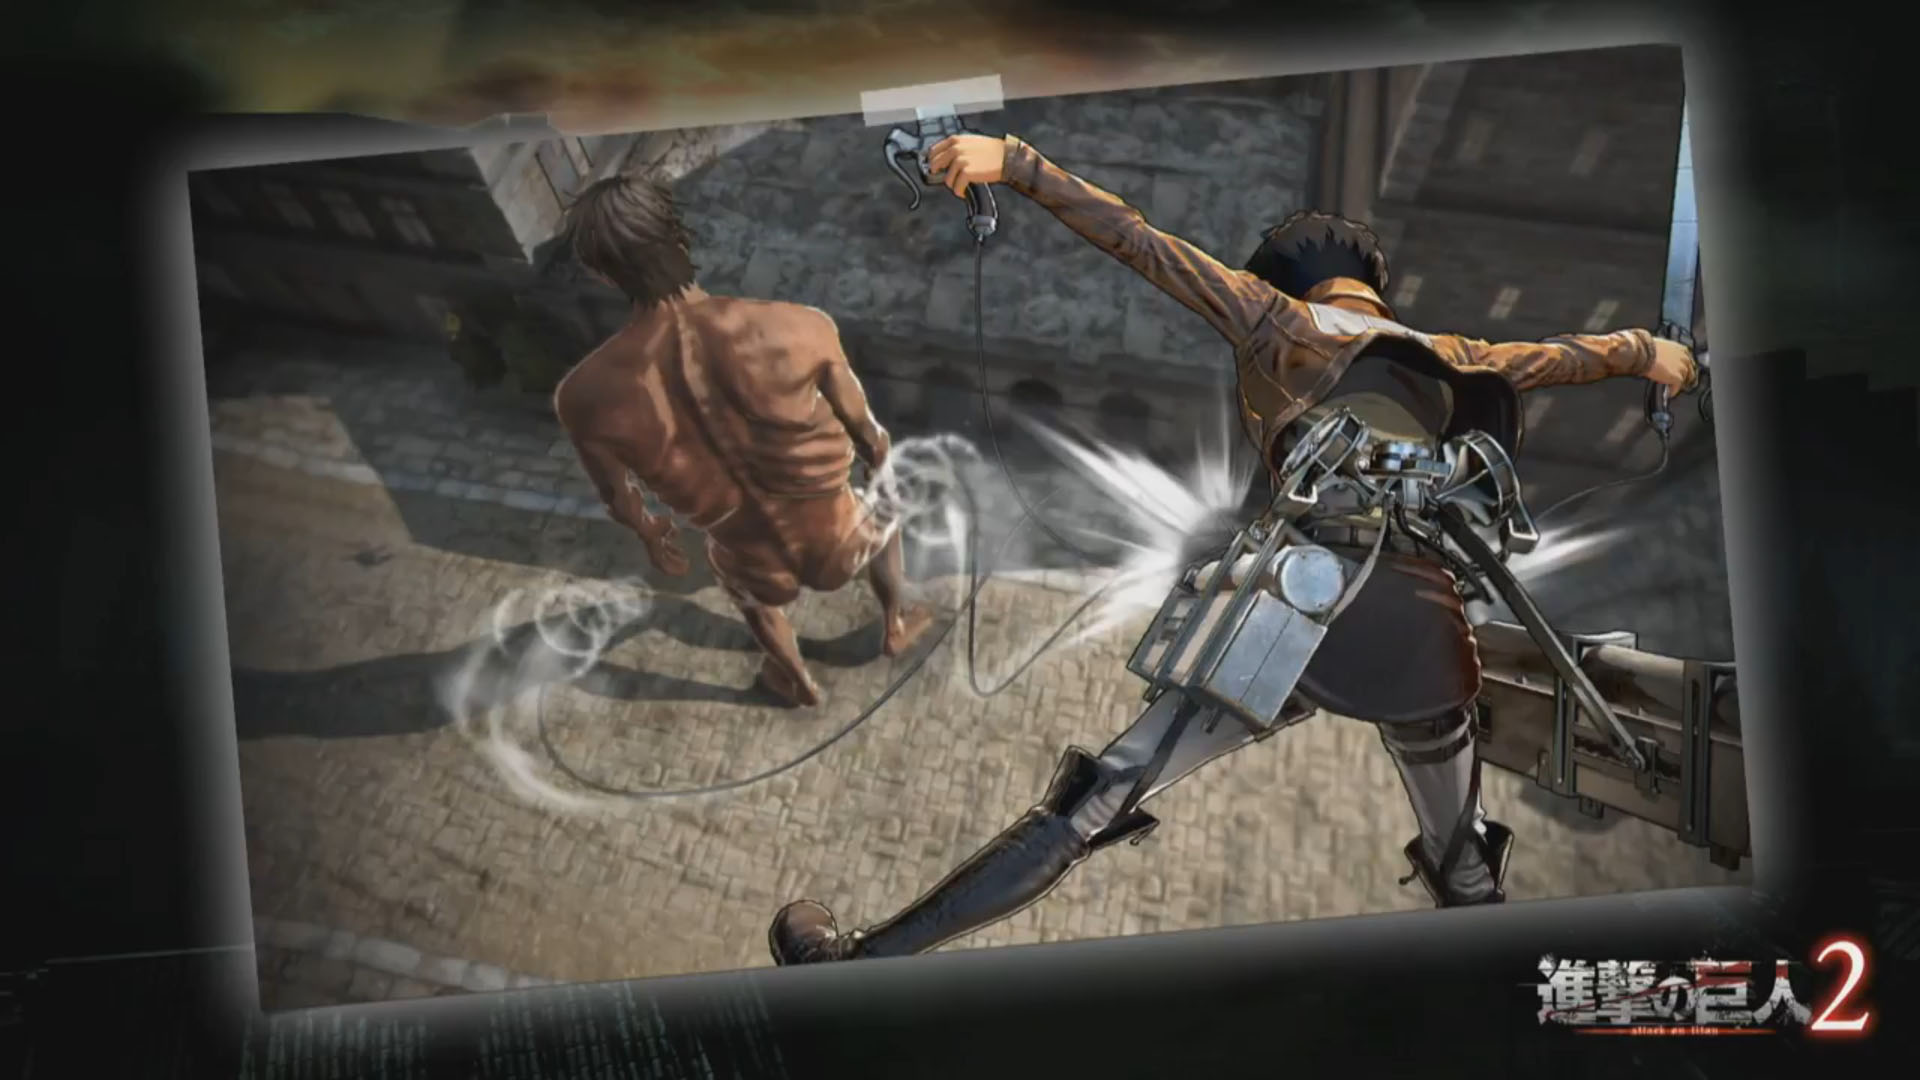 Koei Tecmo S Attack On Titan 2 To Launch For Ps4 Switch Ps Vita And Pc In Japan Update Gematsu